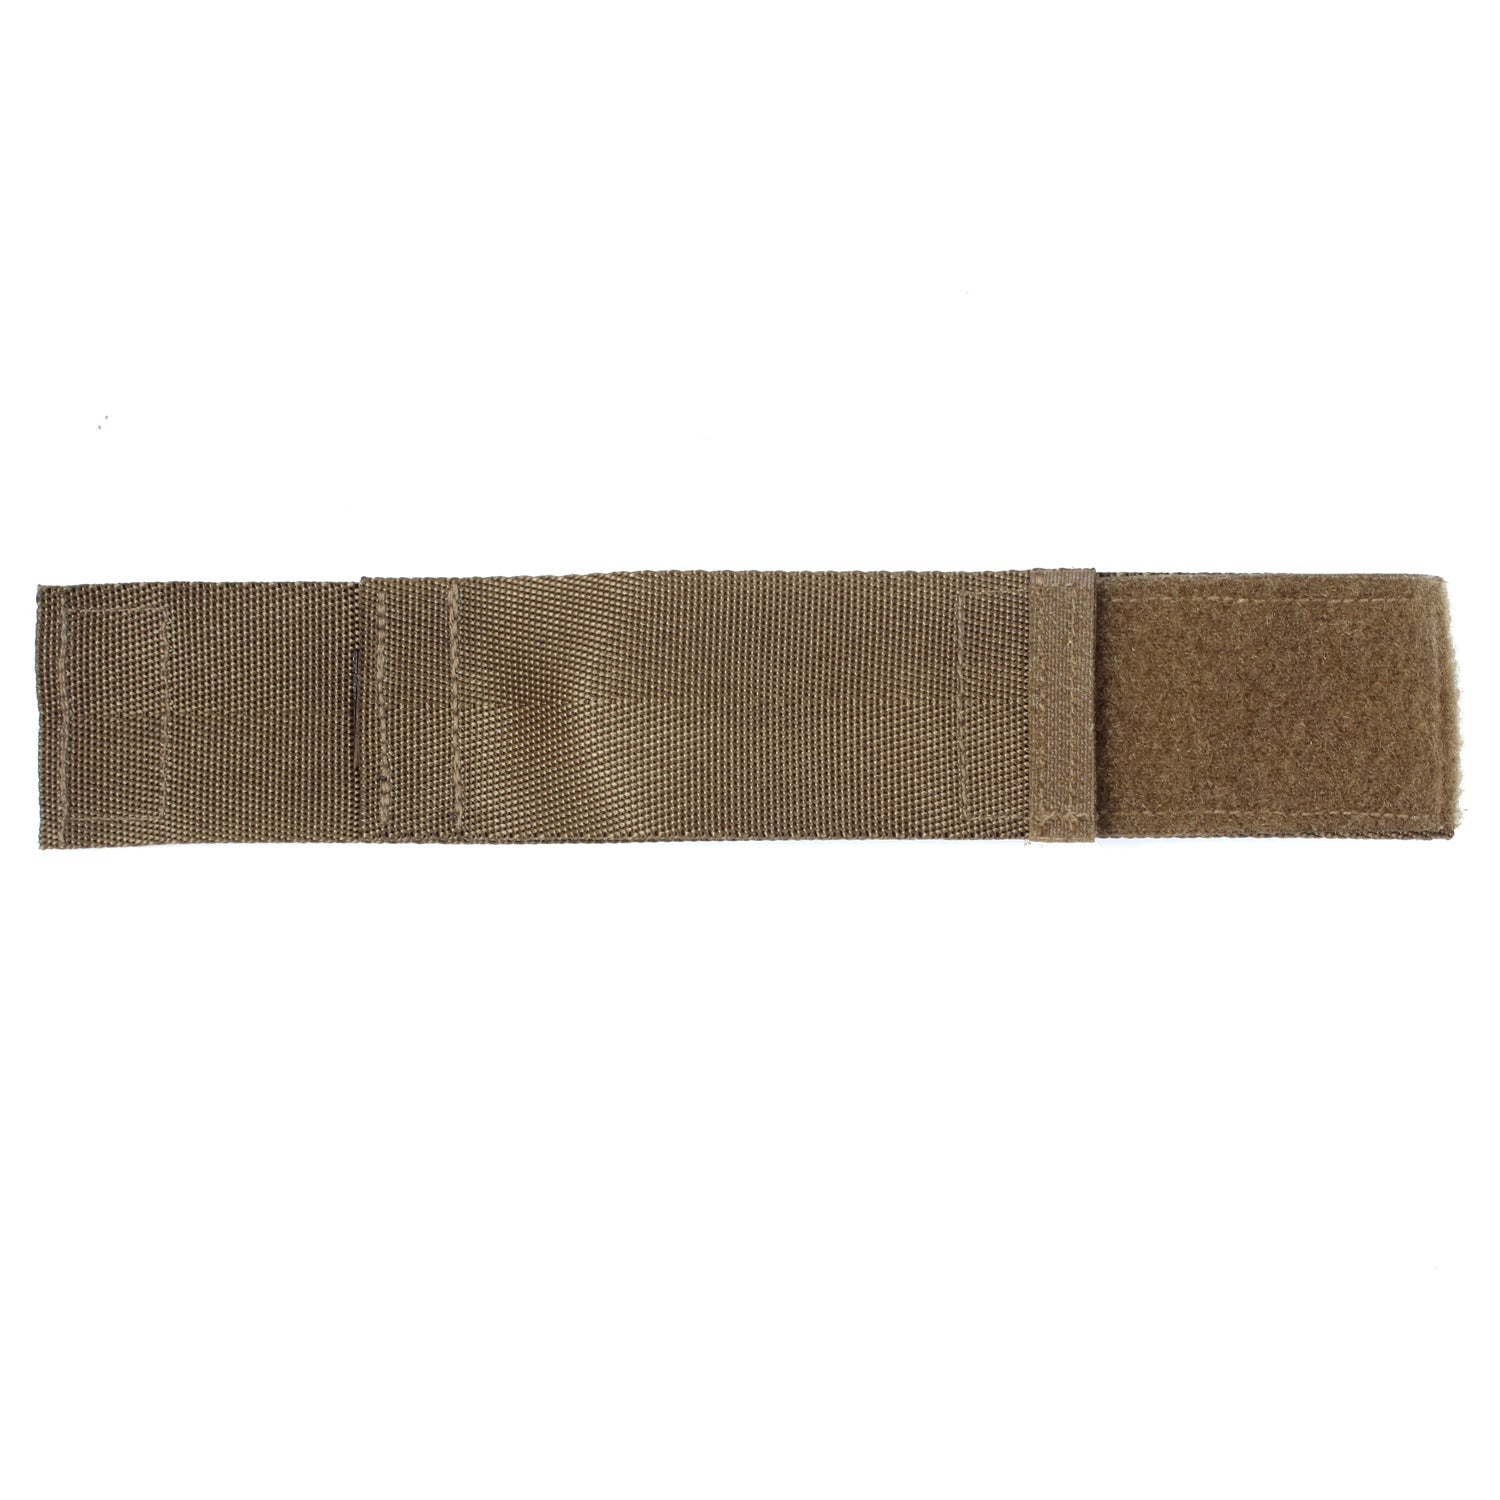 Rothco’s Commando Watchband securely covers your watch for protection against the elements. 